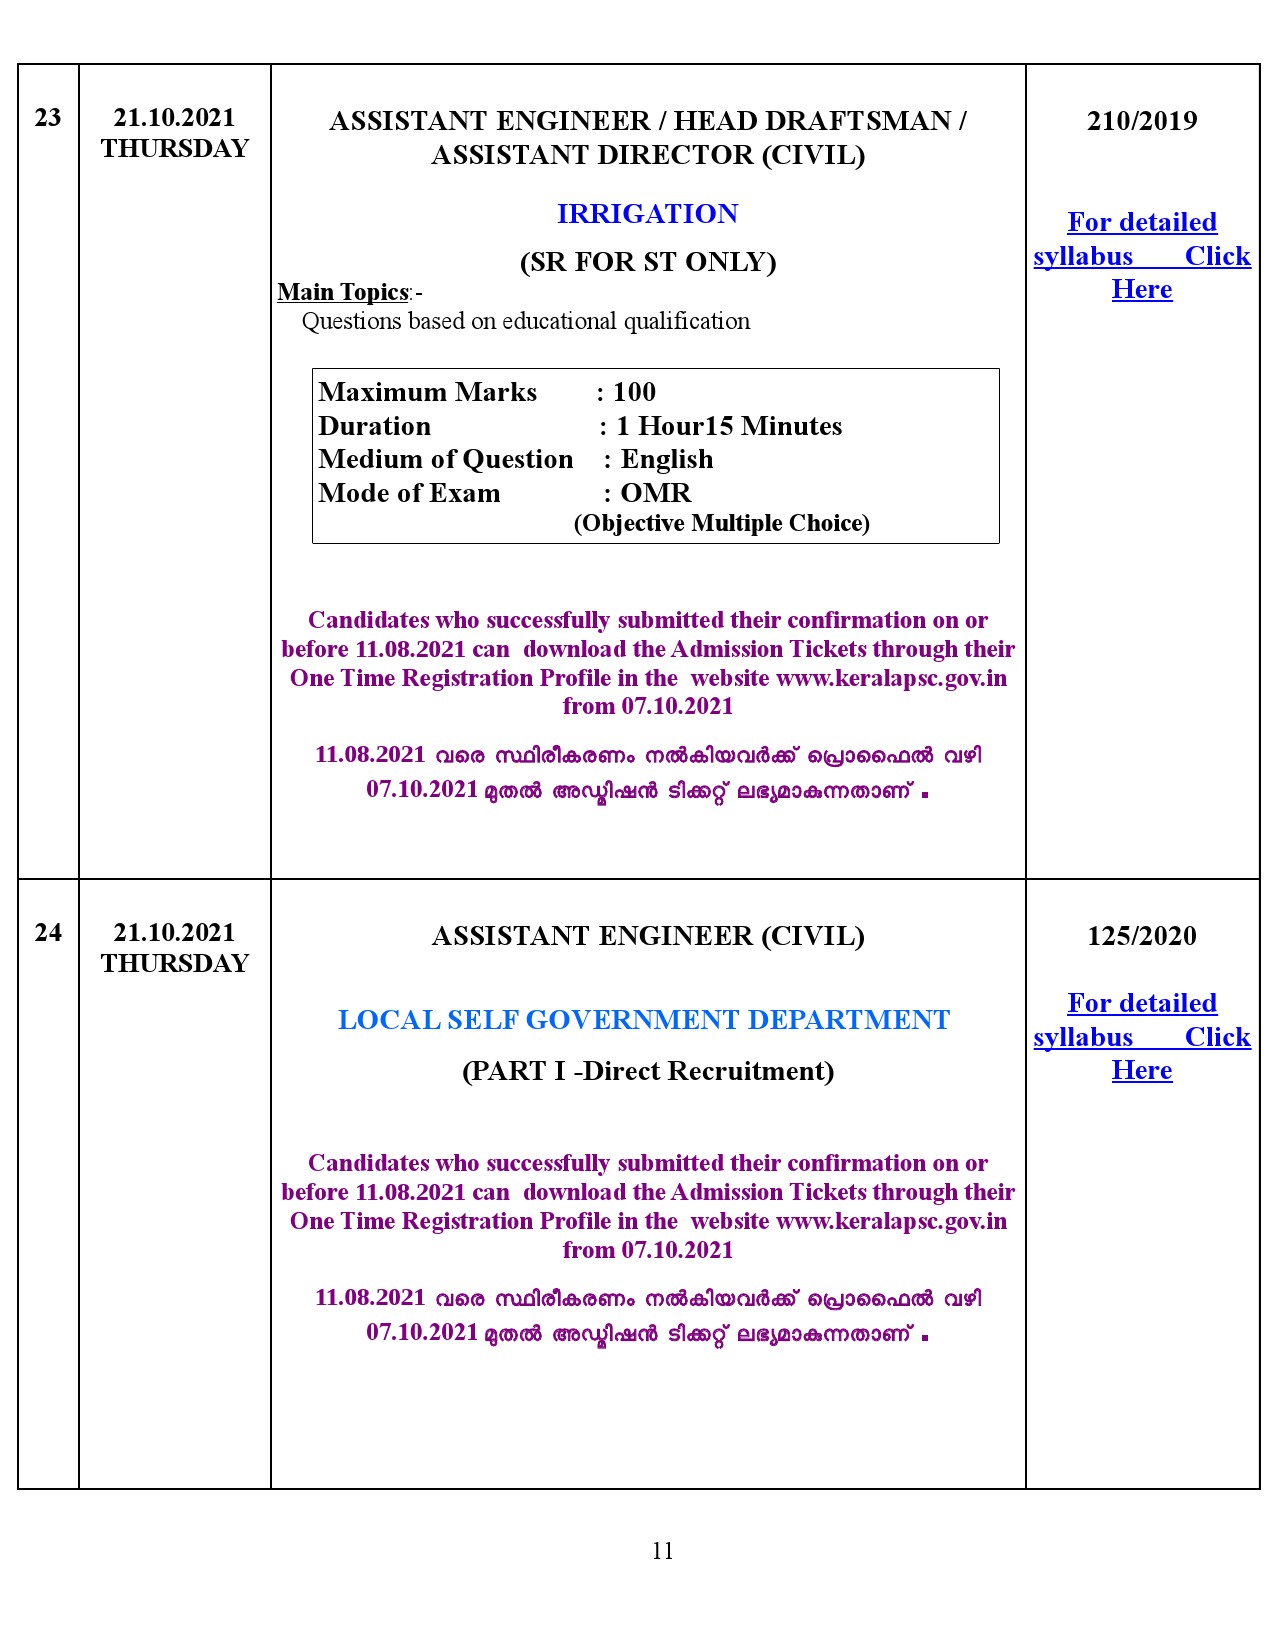 KPSC Examination Programme For The Month Of October 2021 - Notification Image 34